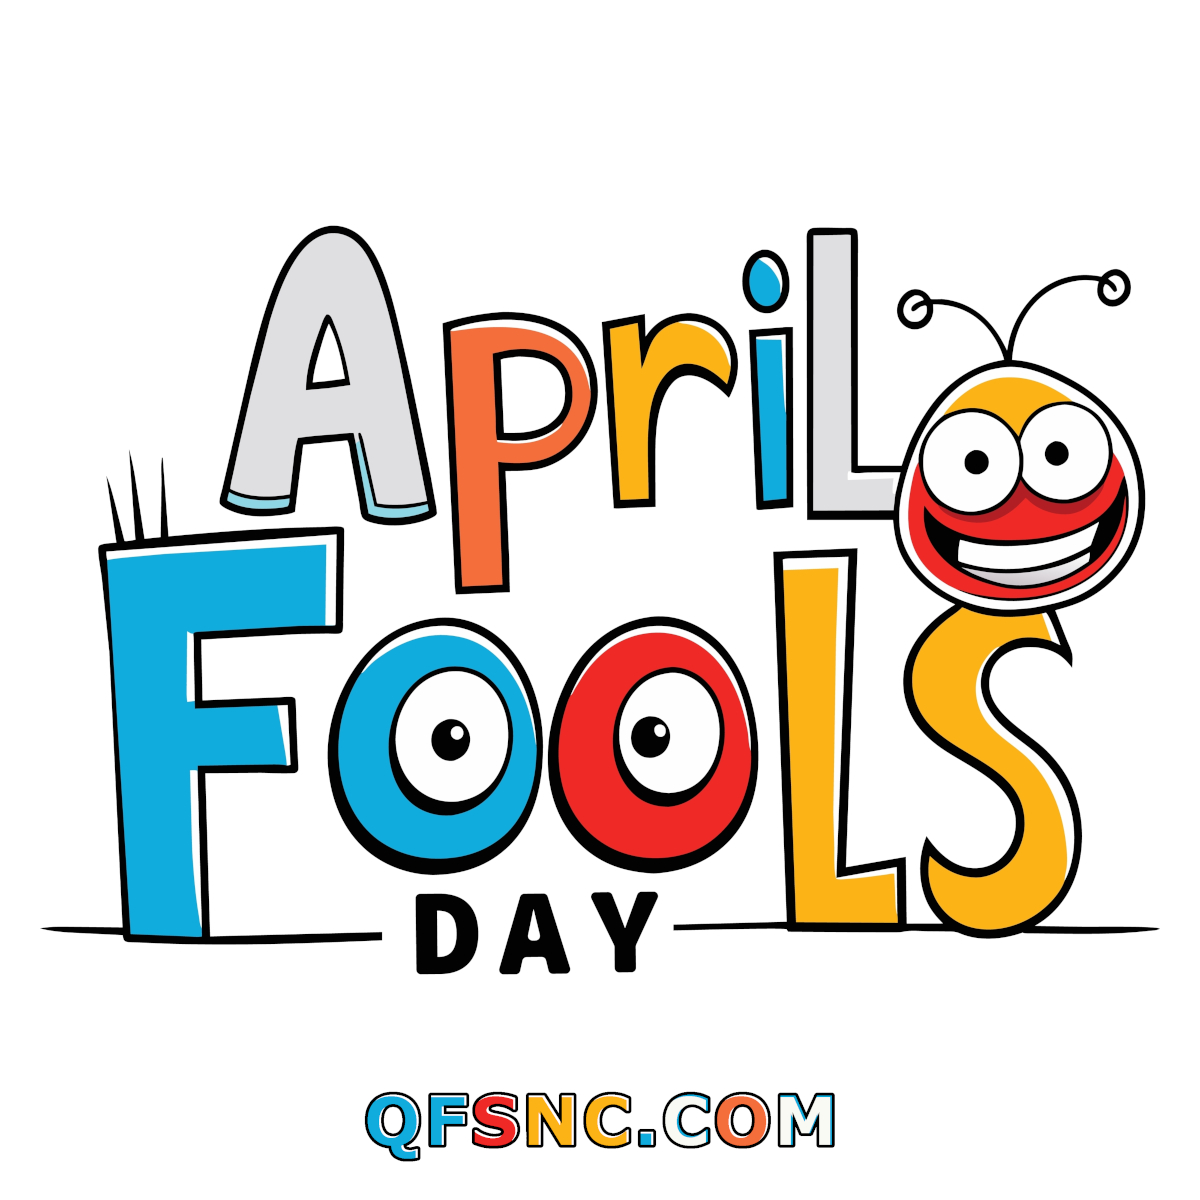 Happy Fools Day. 😊😊😊😊😊😊😊😊😊😊 The Team At Quality Family Services #CharlotteNC #NorthCarolina